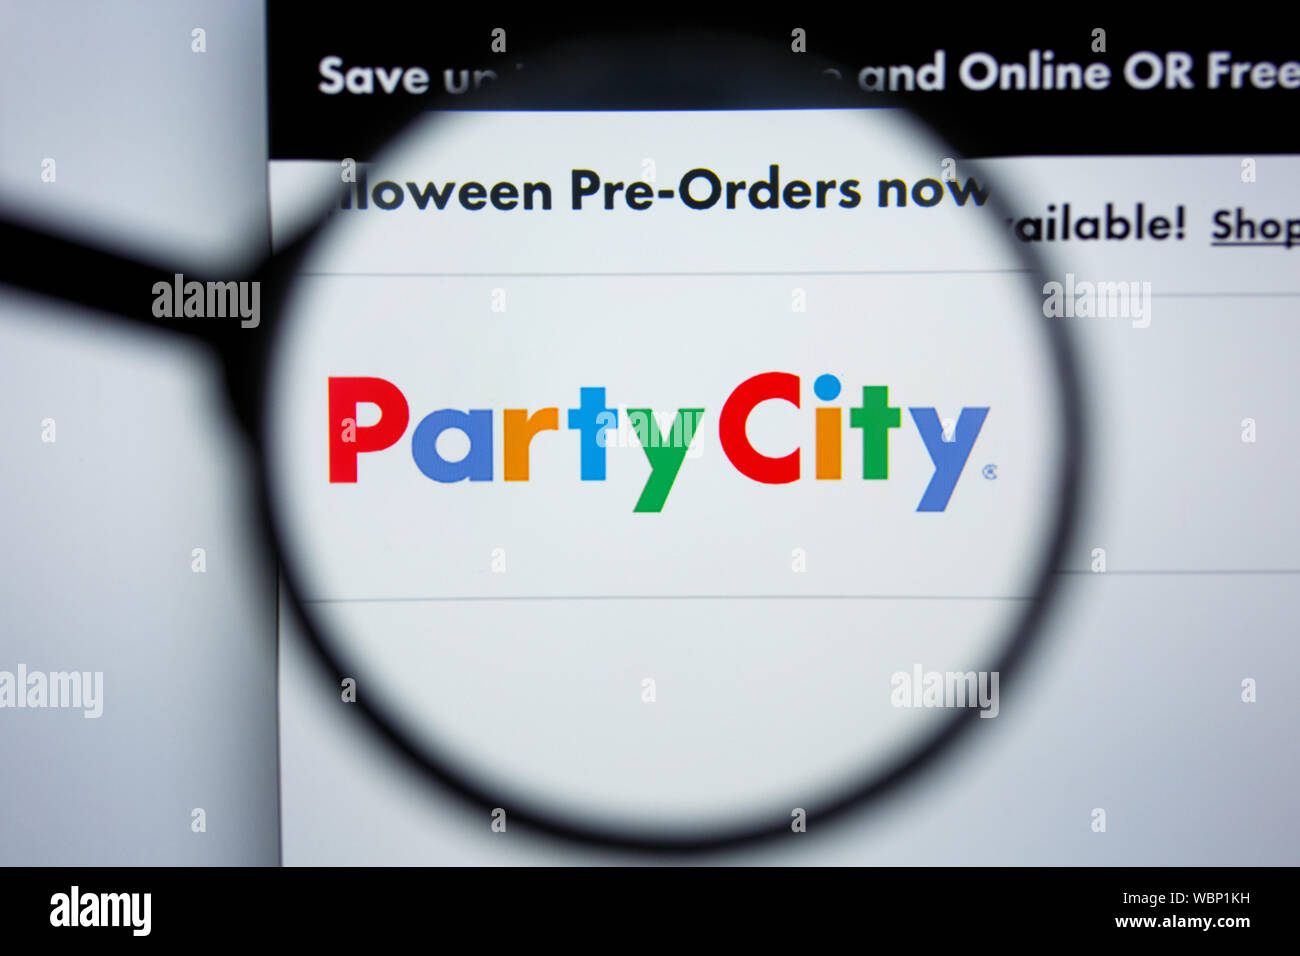 Los Angeles, California, USA - 21 Jule 2019: Illustrative Editorial of PARTYCITY.COM website homepage. PARTY CITY logo visible on display screen. Stock Photo